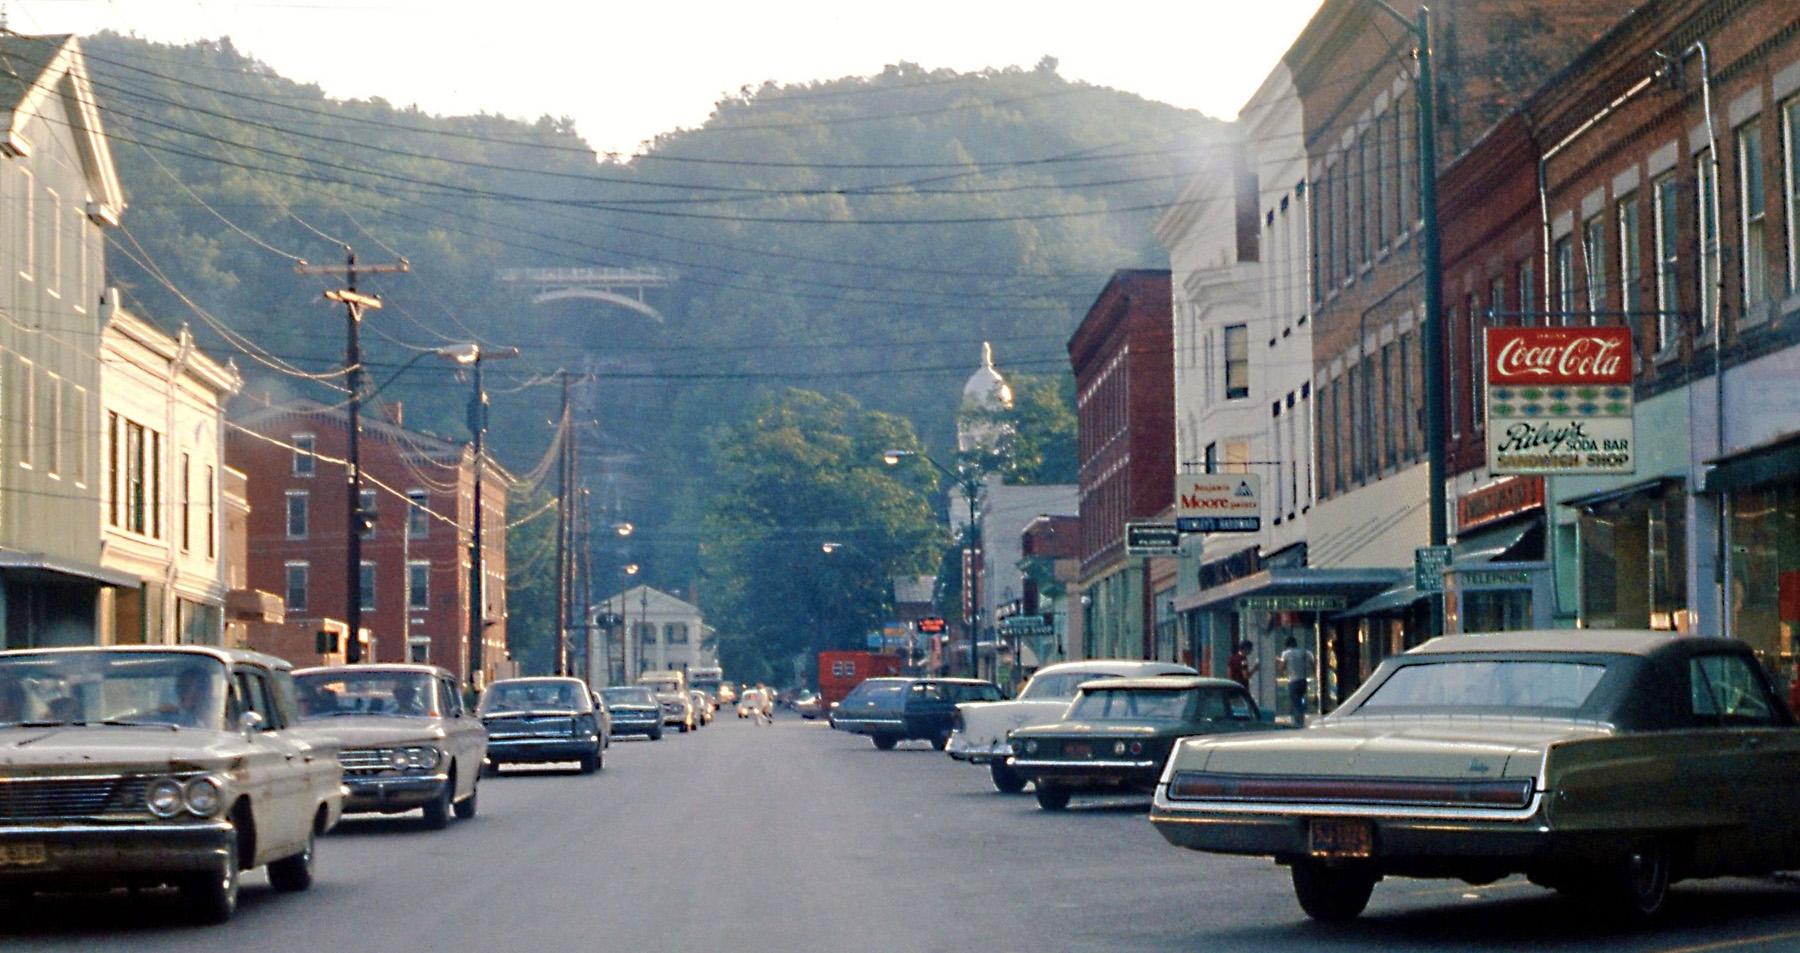 Watkins Glen, N.Y. main street, summer 1970, CanAm weekend. I hope the view looks much the same today, minus the period cars and shop signs. 

[This is actually the village of Montour Falls, two miles south of Watkins Glen. - tterrace]

View full size.